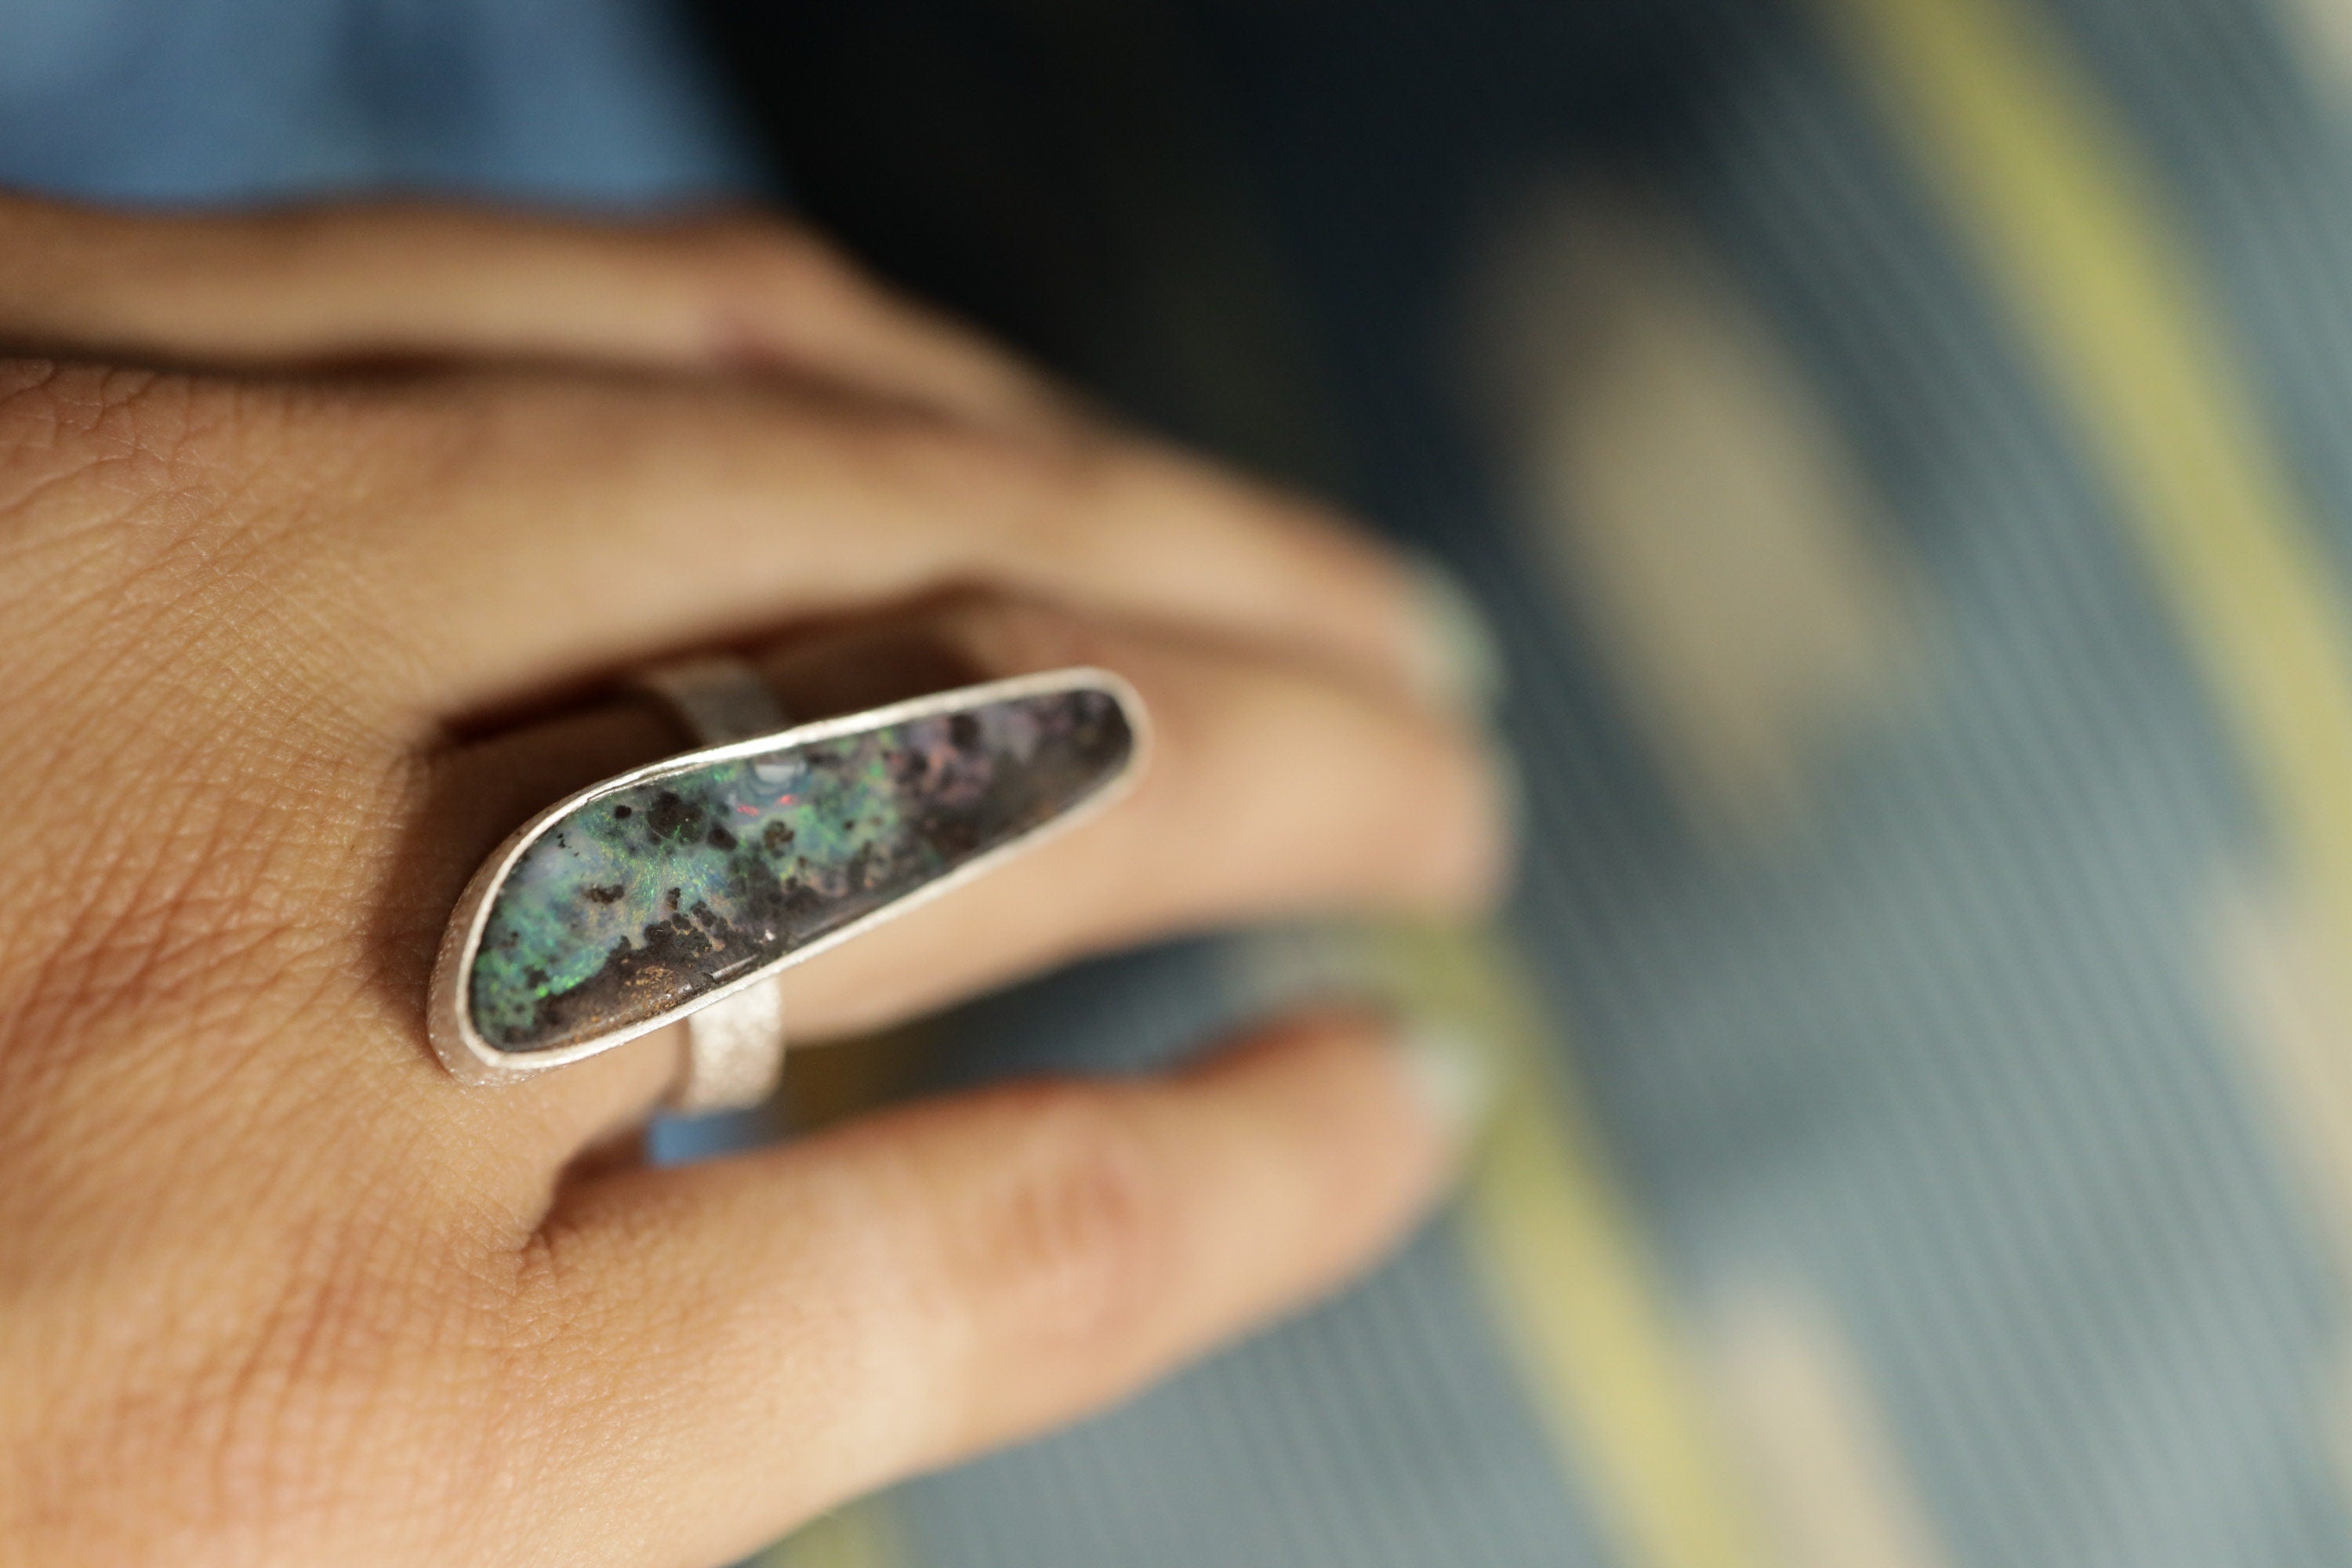 Ethereal Light Opal: Adjustable Sterling Silver Ring with Opal - Textured - Unisex - Size 5-12 US